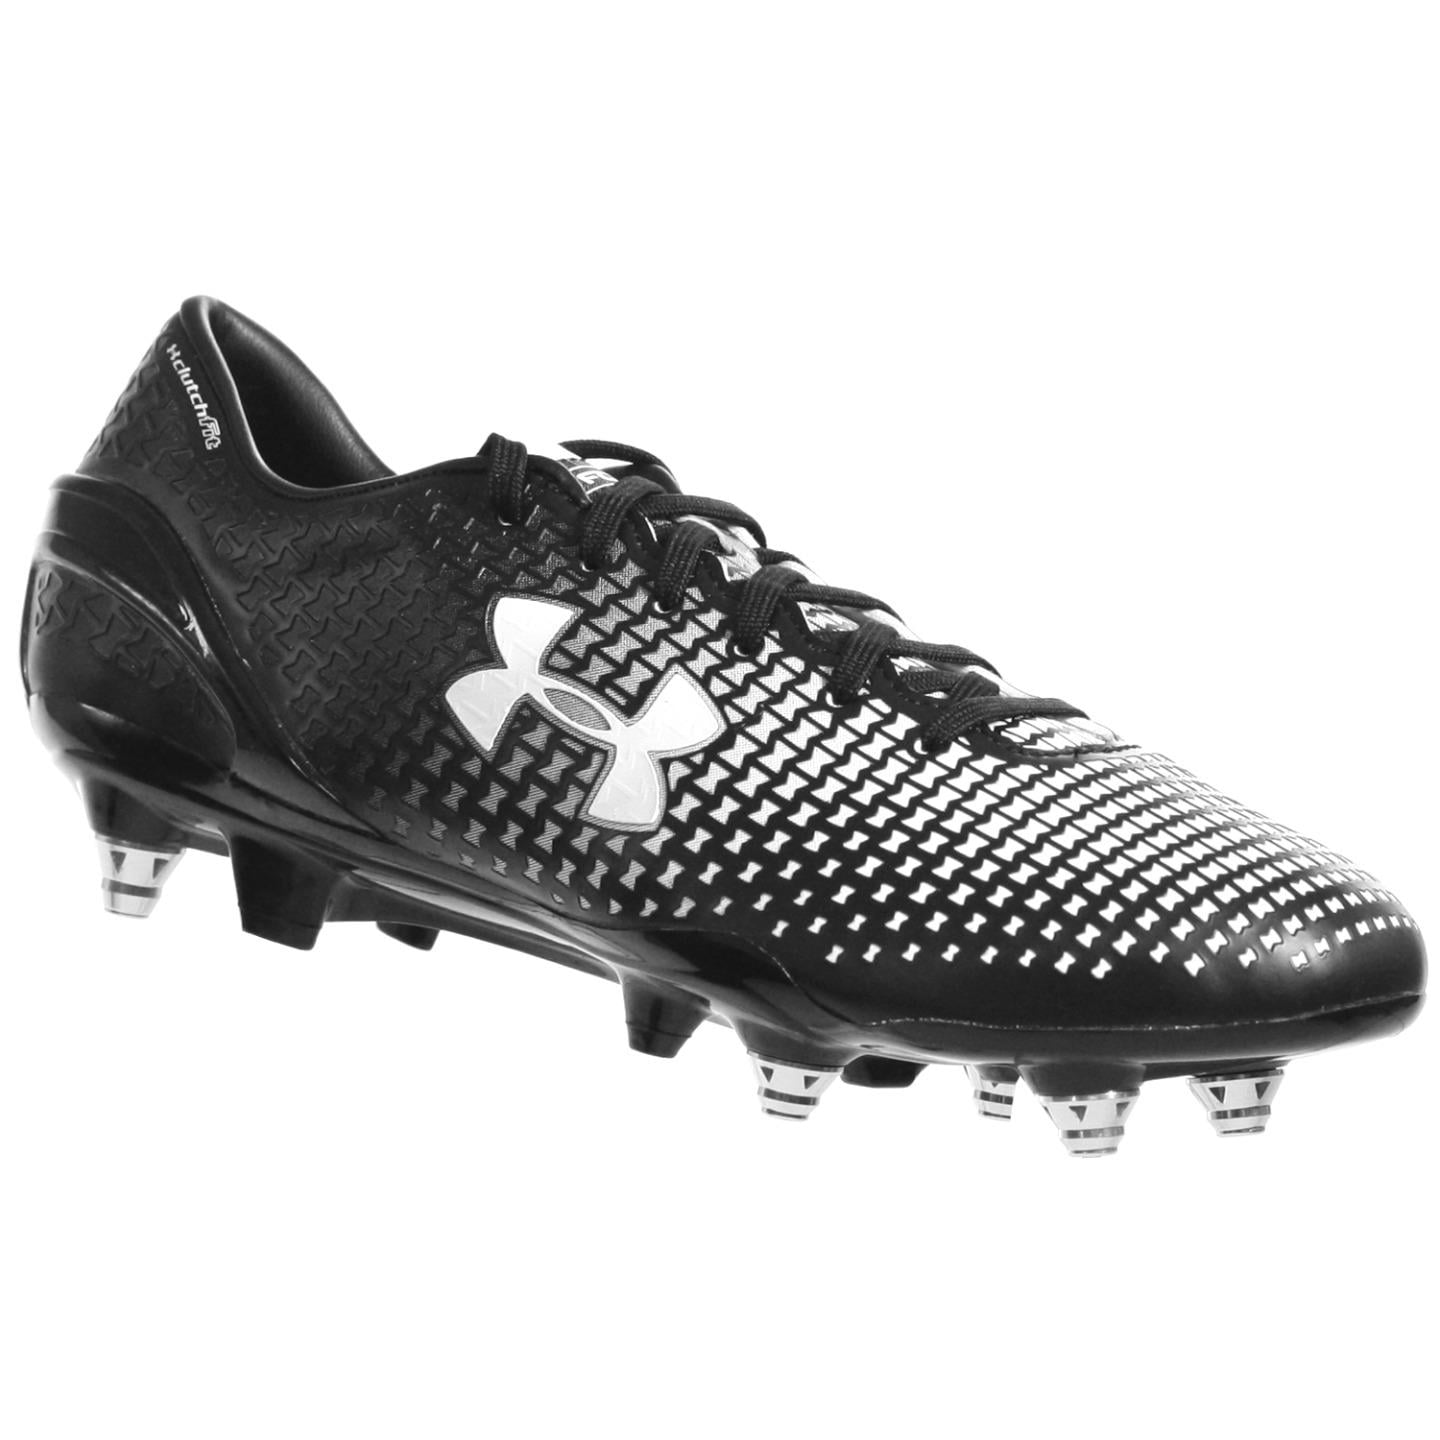 Under Armour UA Clutchfit Force Fixed Gear Men's Soccer Crampons style 1246295-004 $175 